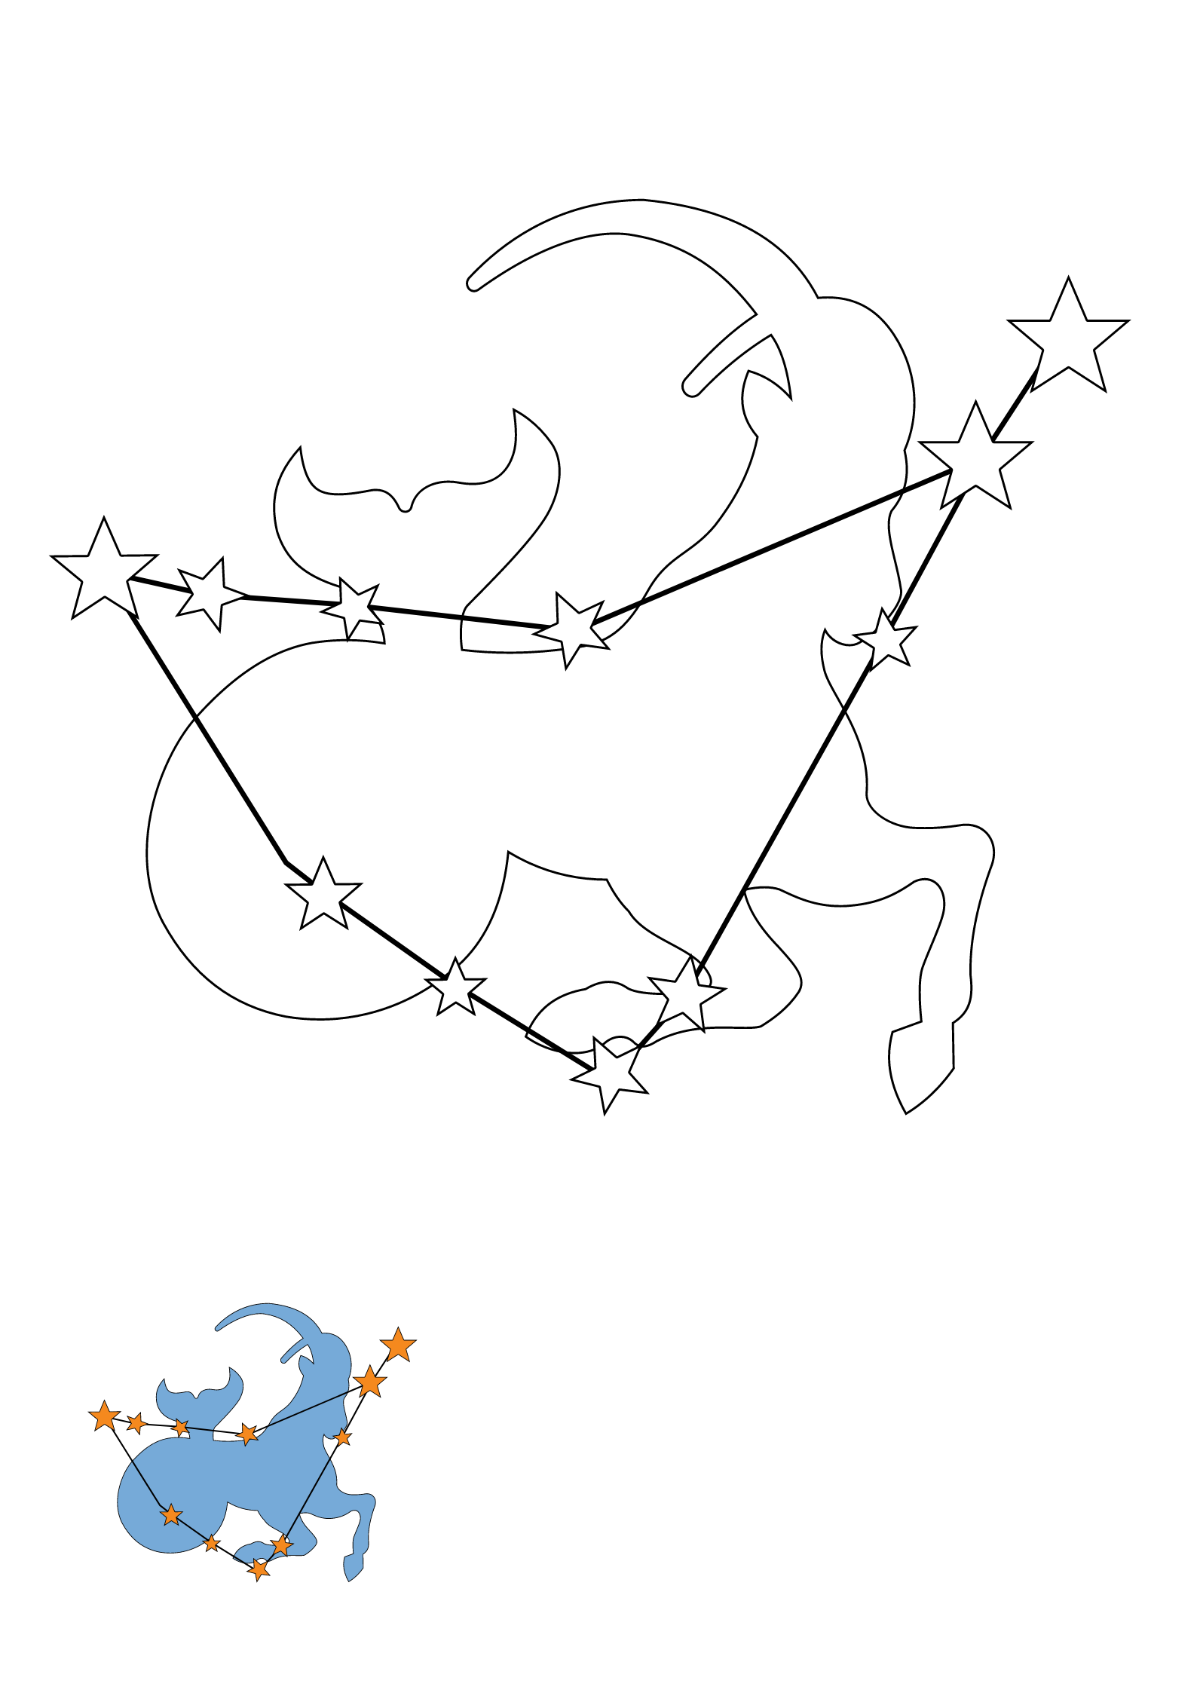 Capricorn Constellation coloring page